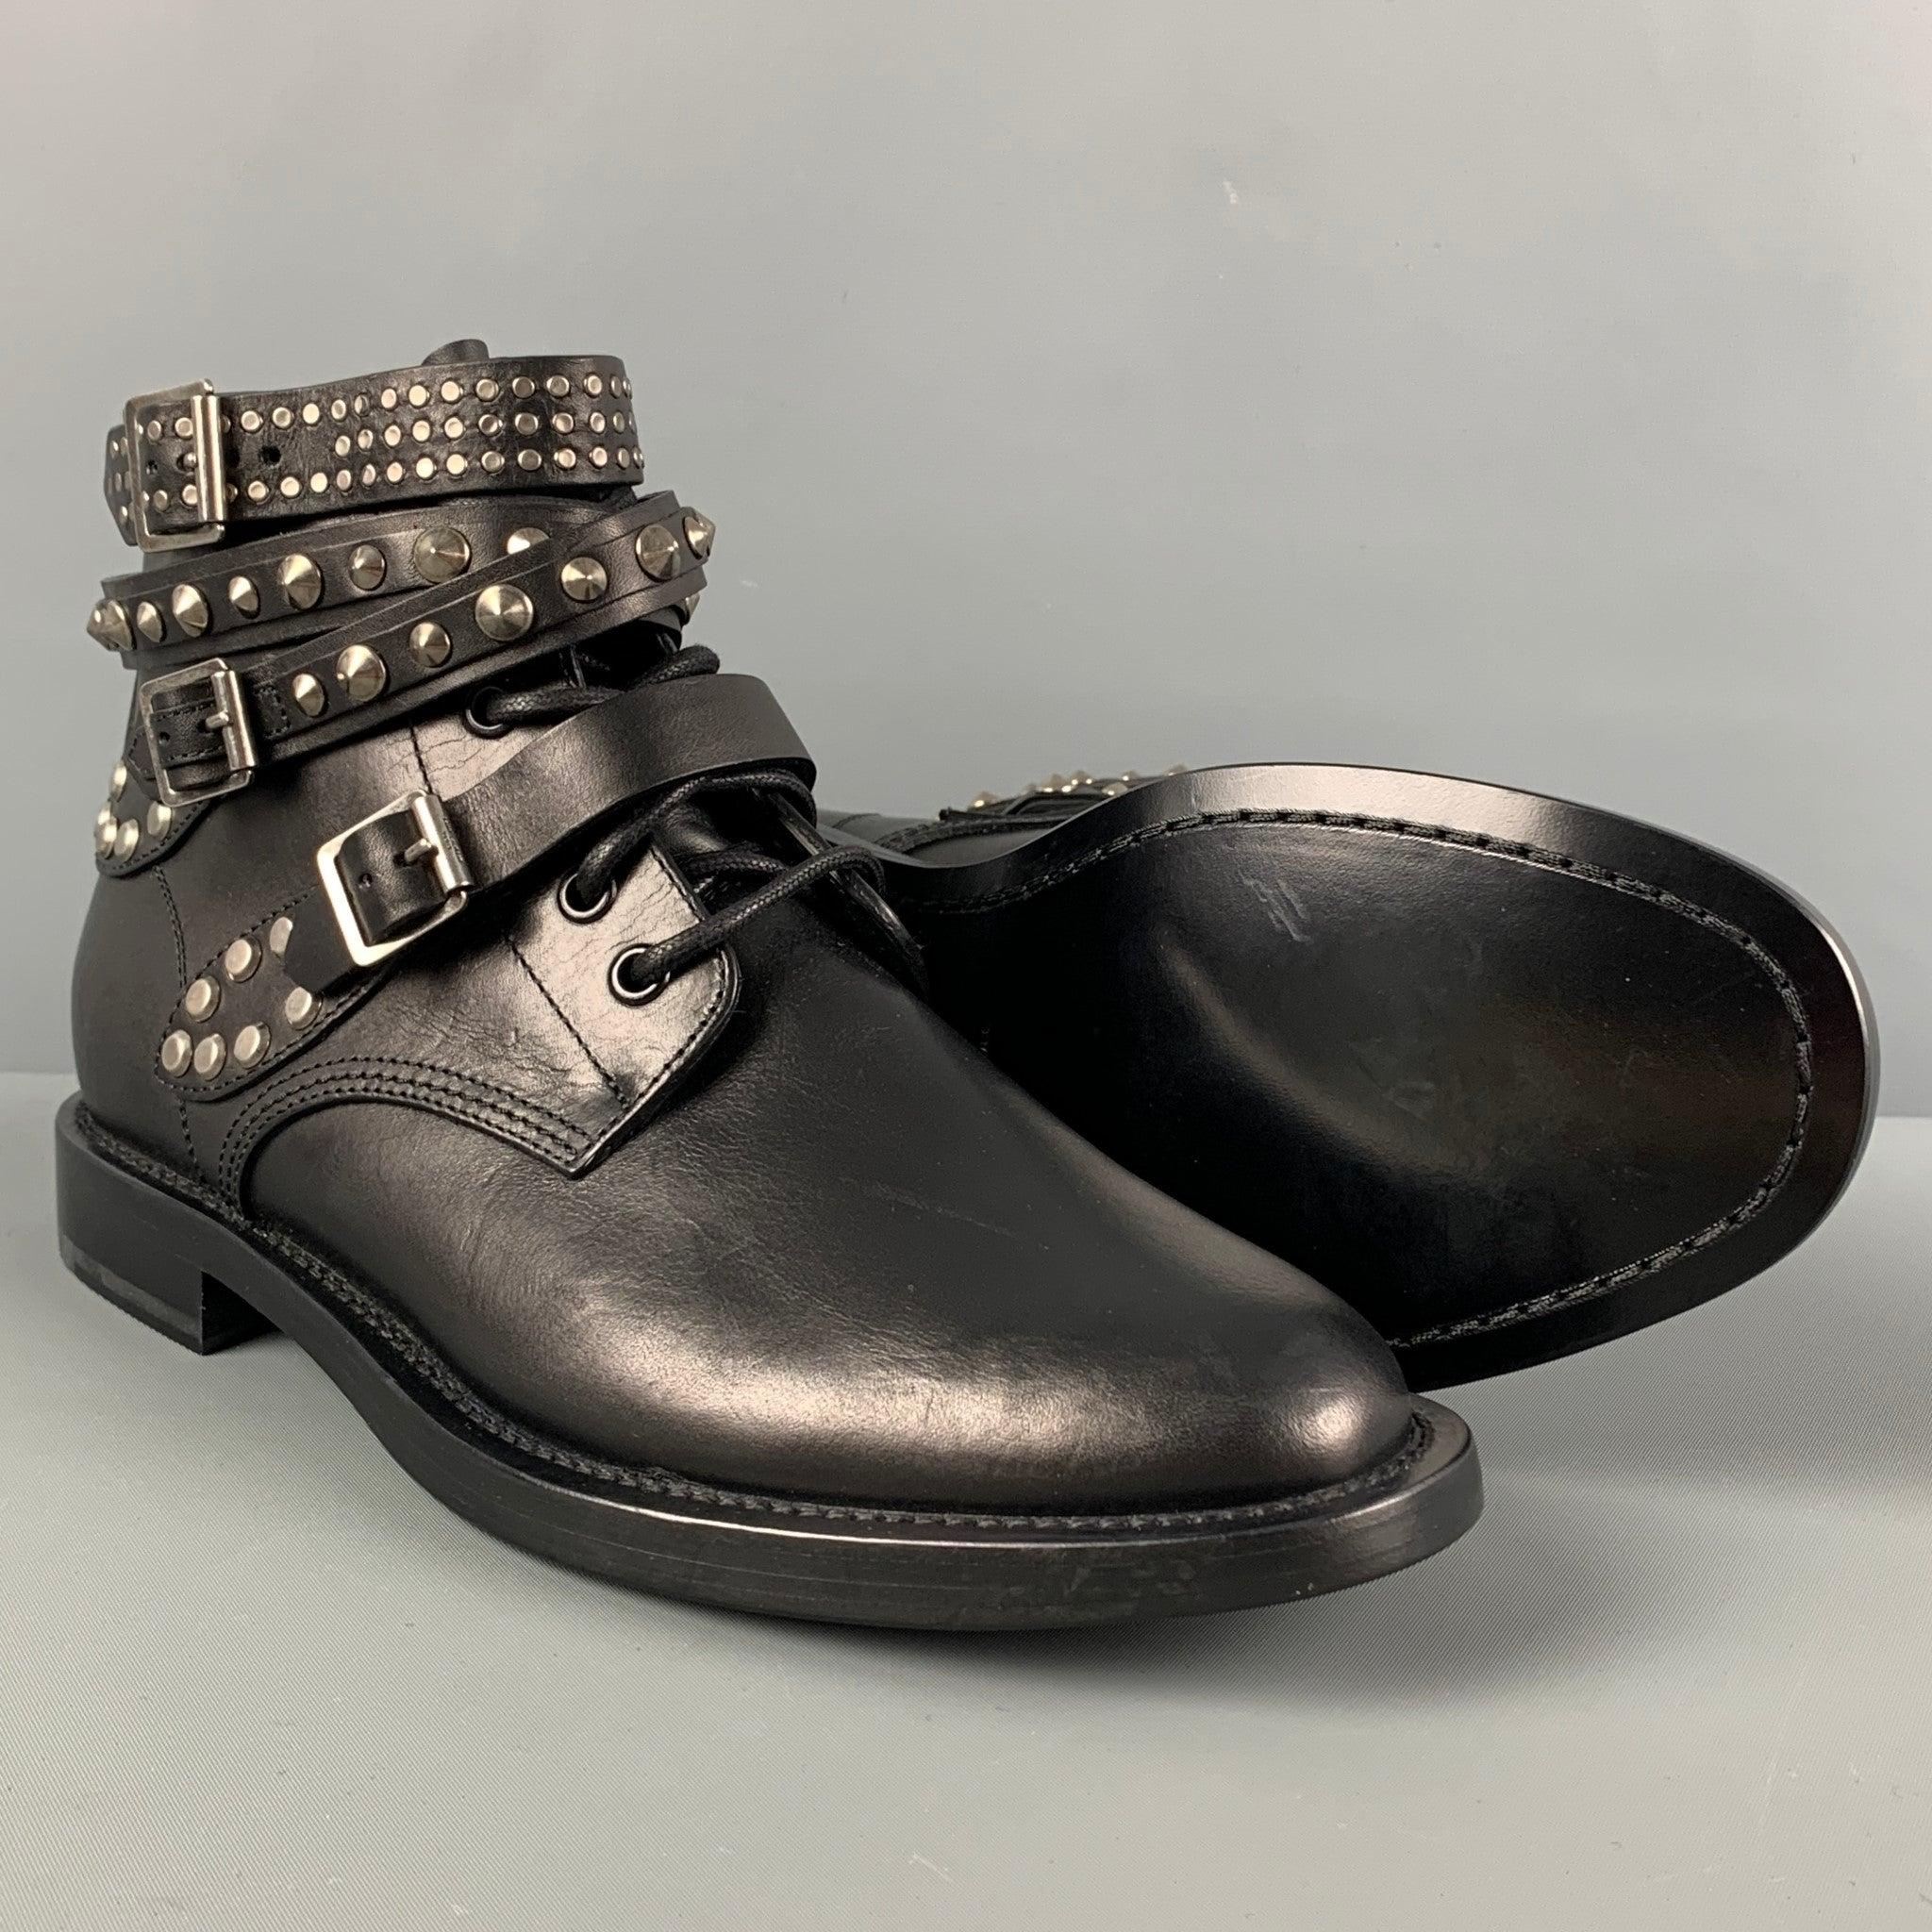 SAINT LAURENT Size 10 Black Leather Studded Ranger Boots In Good Condition For Sale In San Francisco, CA